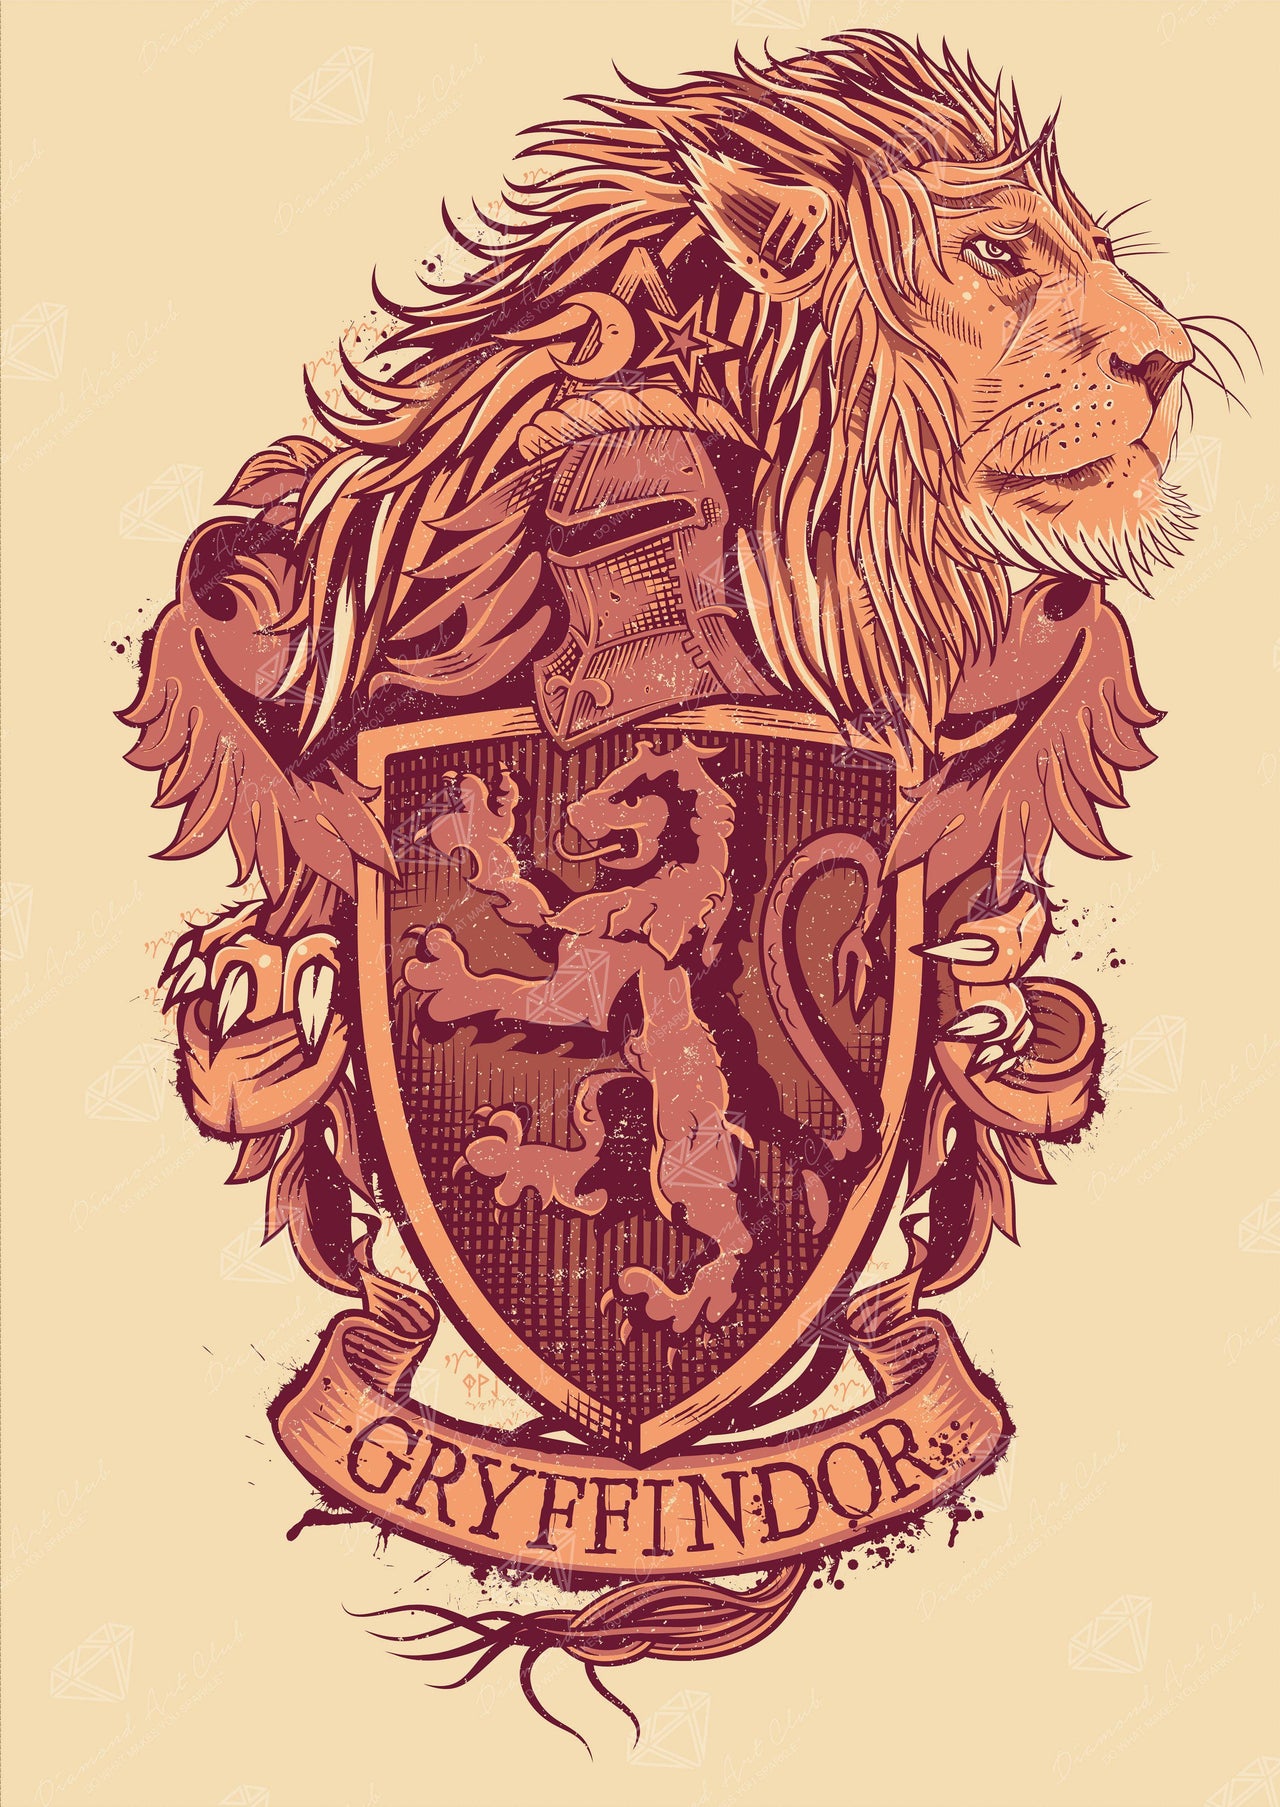 Diamond Painting Gryffindor Crest - Tomes & Scrolls 22" x 31″ (56cm x 79cm) / Square With 9 Colors Including 1 AB / 68,952